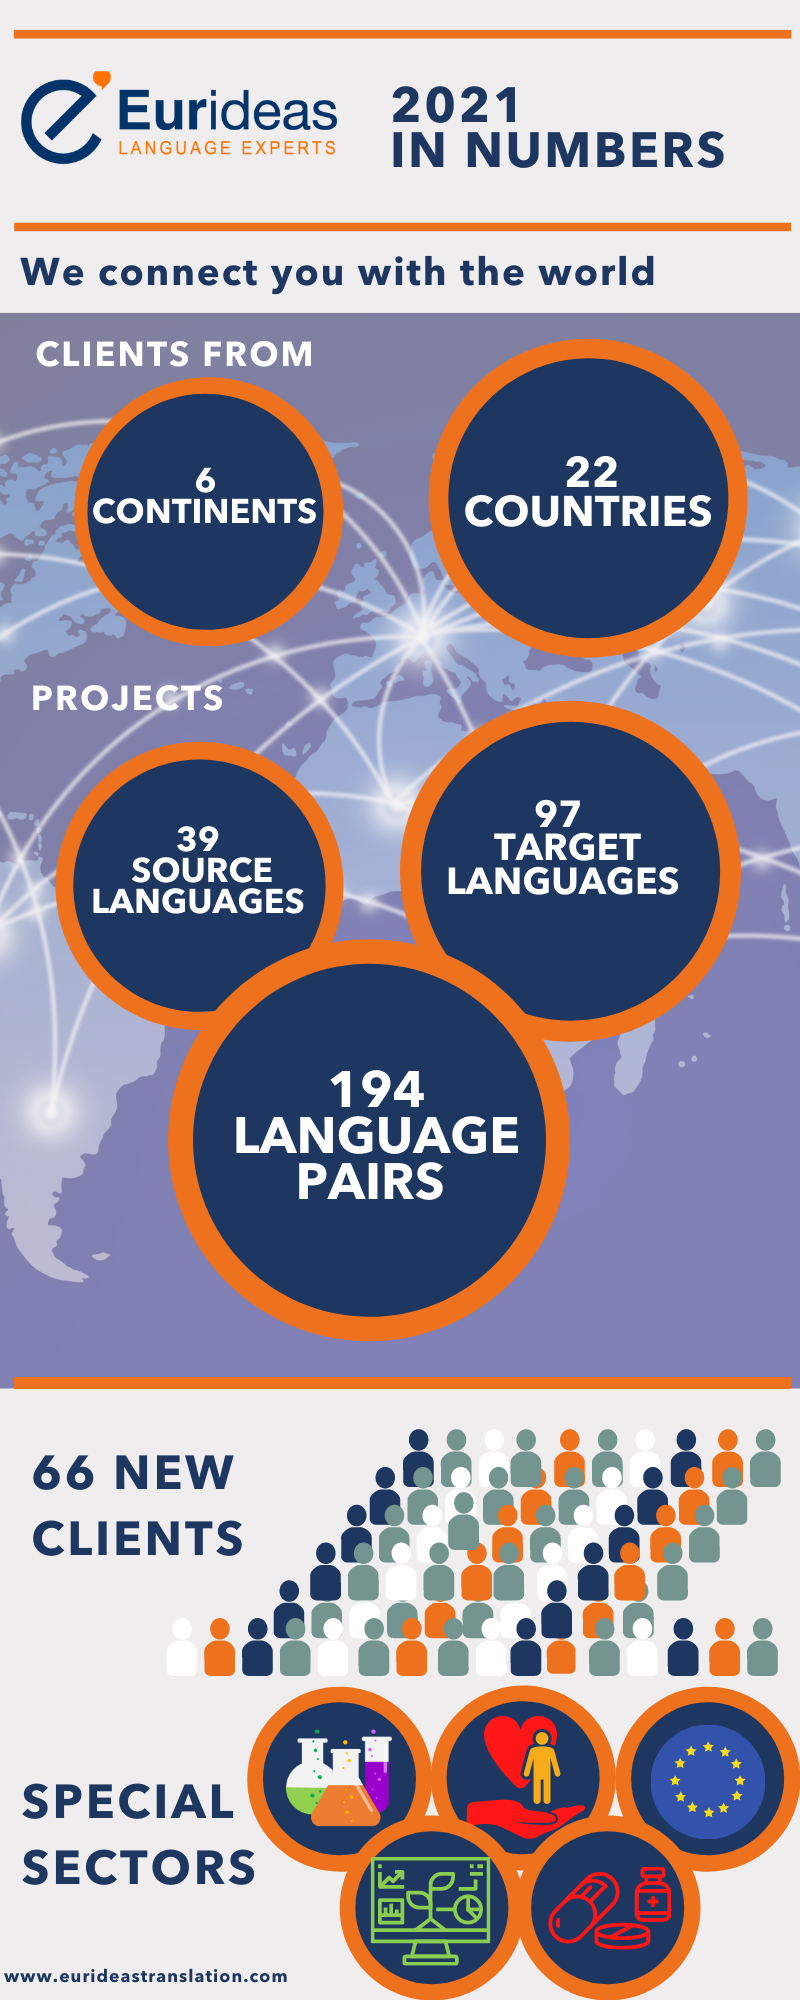 Infographic about 2021 at Eurideas Language Experts: international clients, multilingual translation and interpretation projects, special sectors